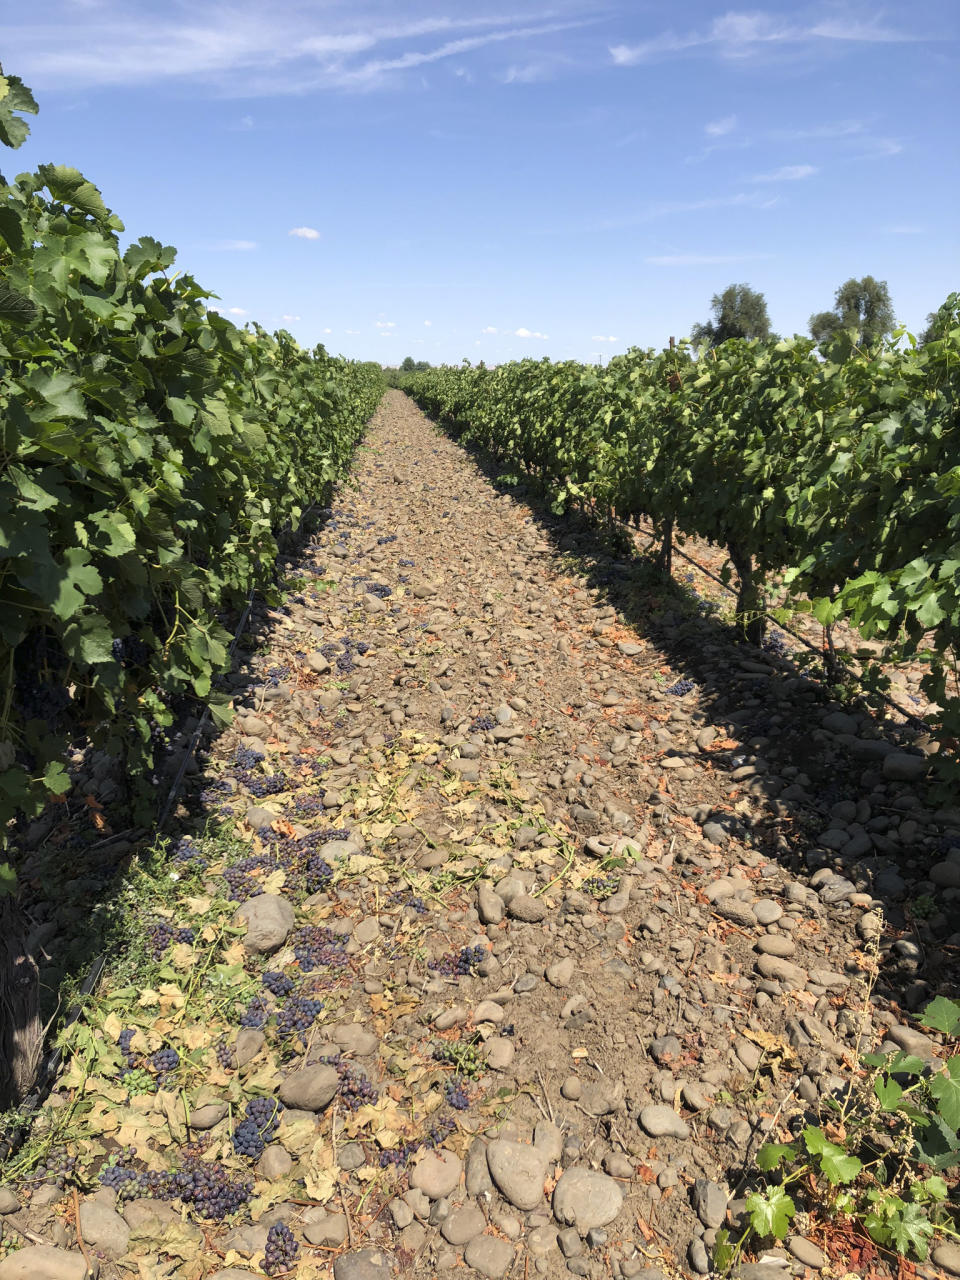 This Aug. 12, 2019 photo shows wine grapes growing amid the stones in the River Rock Vineyard in Milton-Freewater, Oregon. Southeastern Washington has been producing high-quality wines for decades. But in the past five years, the wineries of the Walla Walla Valley have drawn international accolades for the reds produced from the unique soil just across the border in Oregon. (AP Photo/Sally Carpenter Hale)